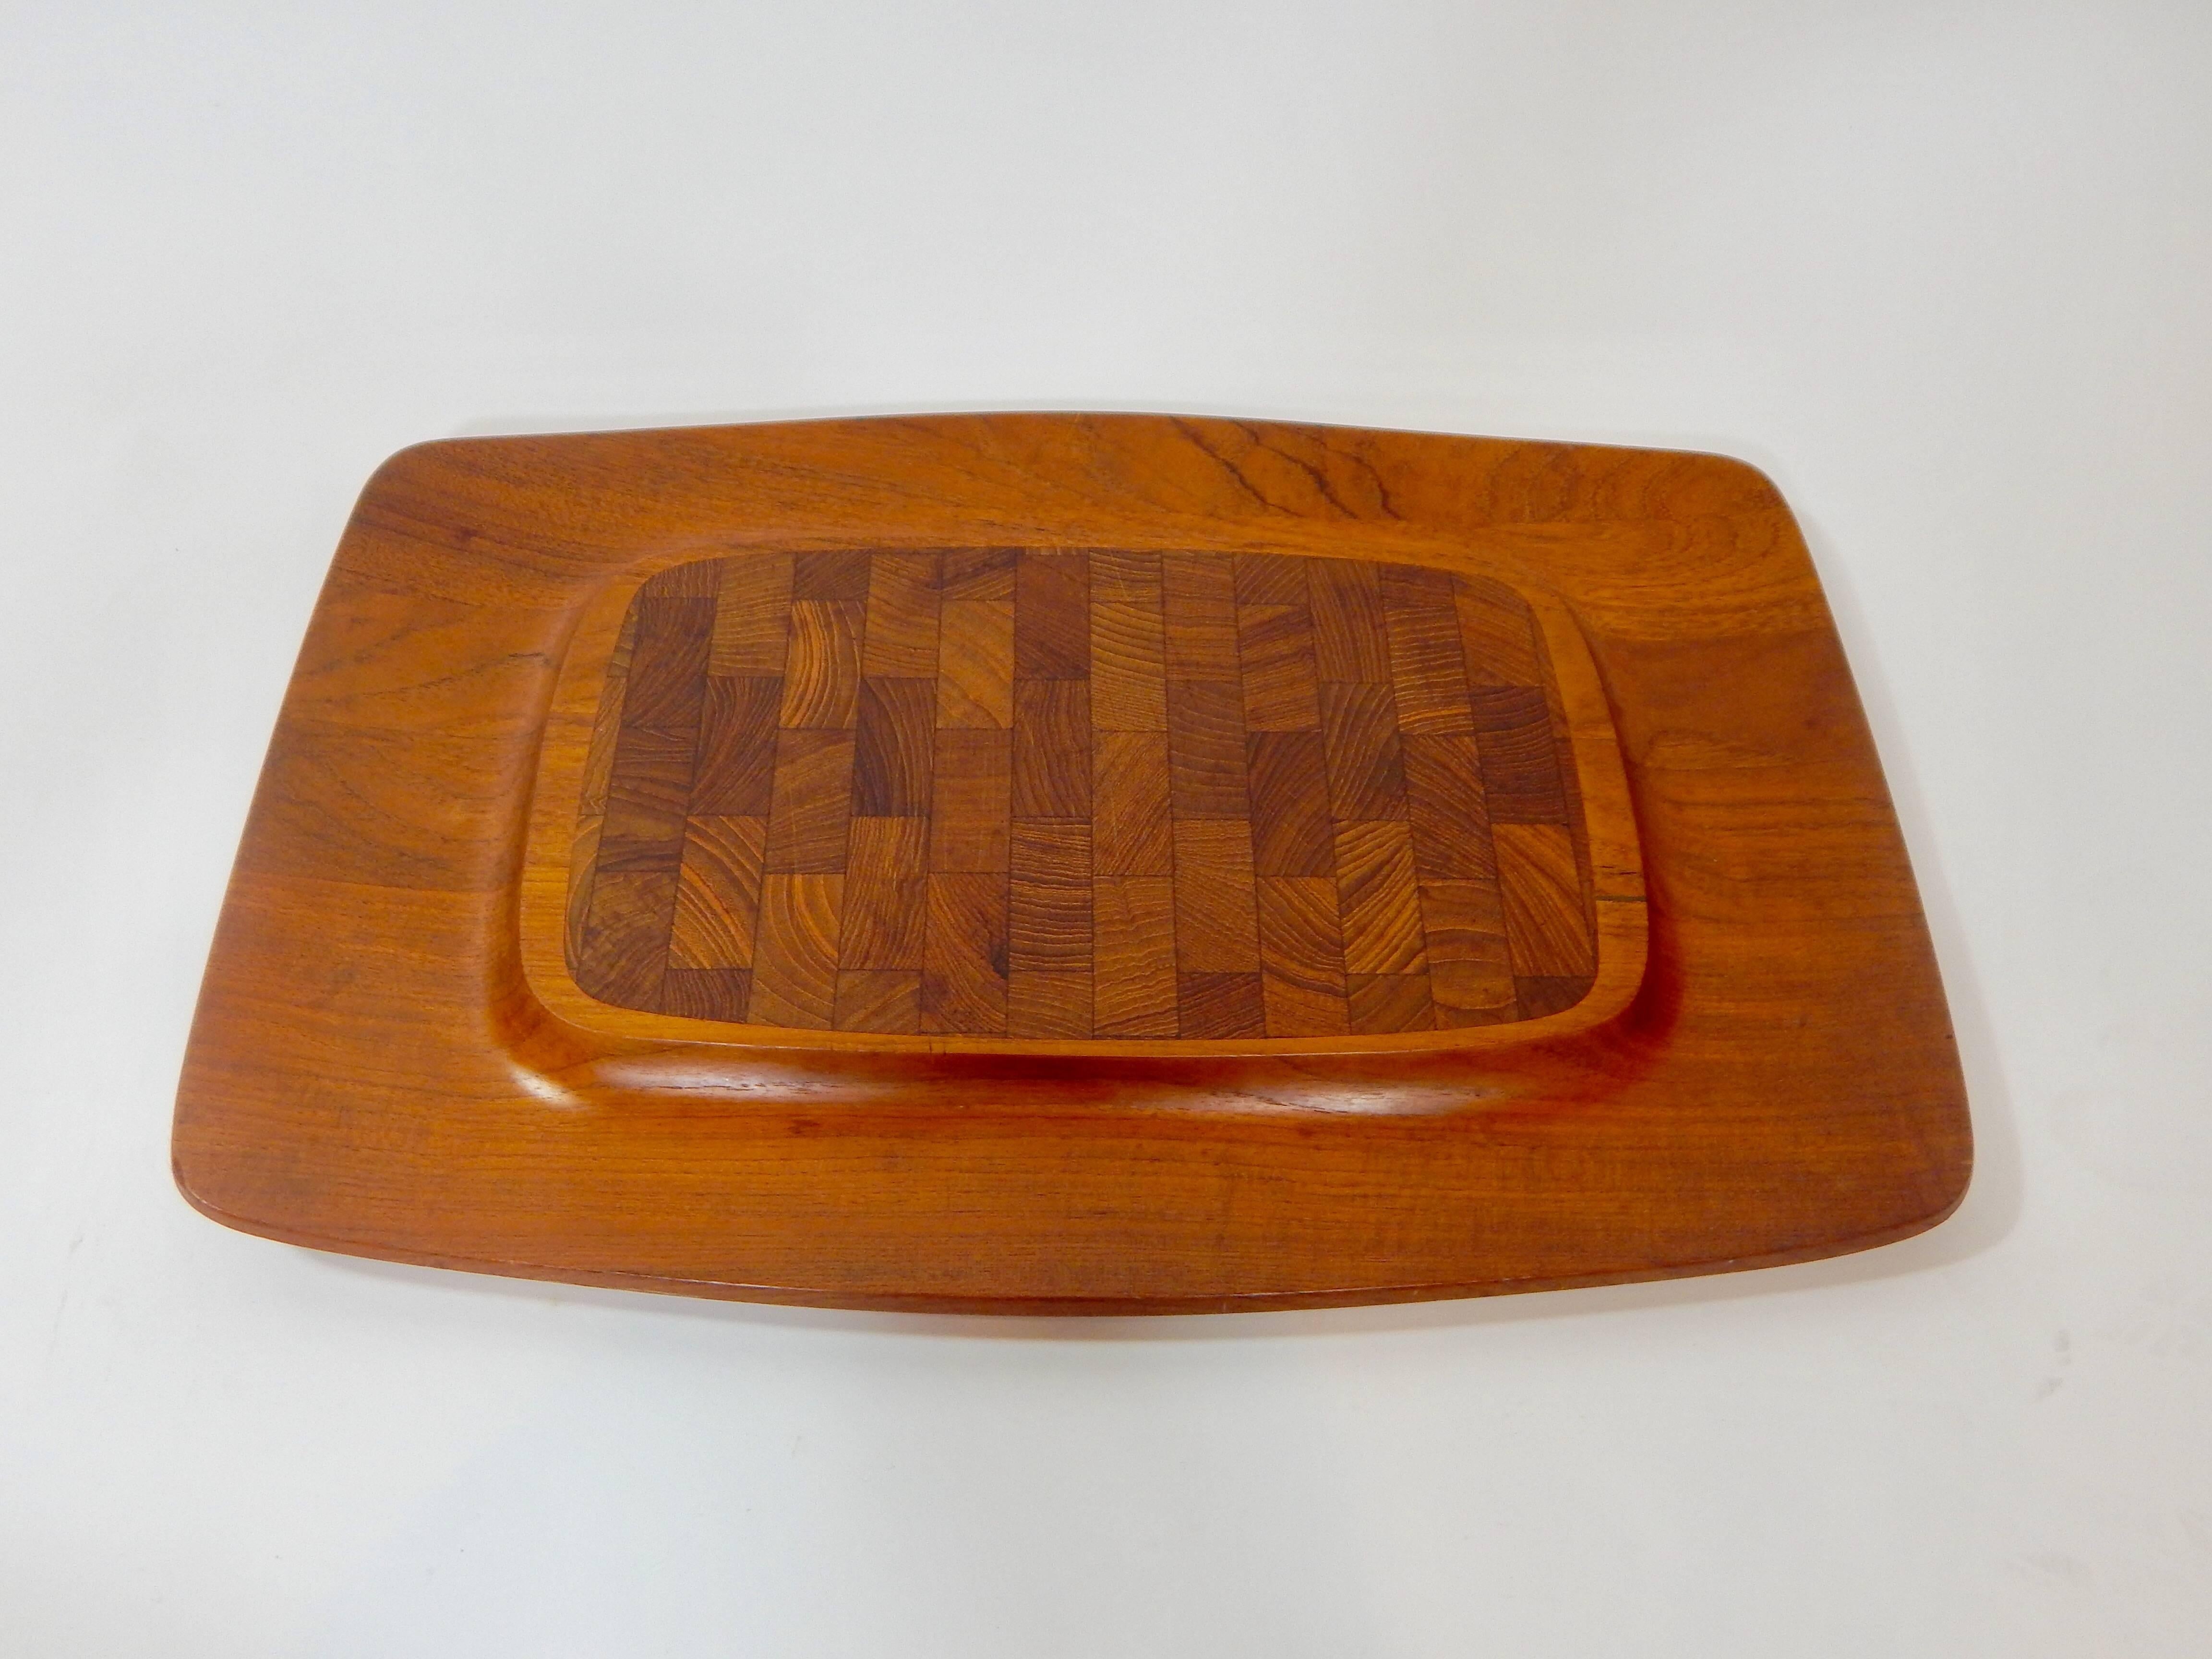 Midcentury teak serving tray designed by Jens Quistgaard / JHQ for Dansk.
Perfect for Charcuterie. Markings on bottom.